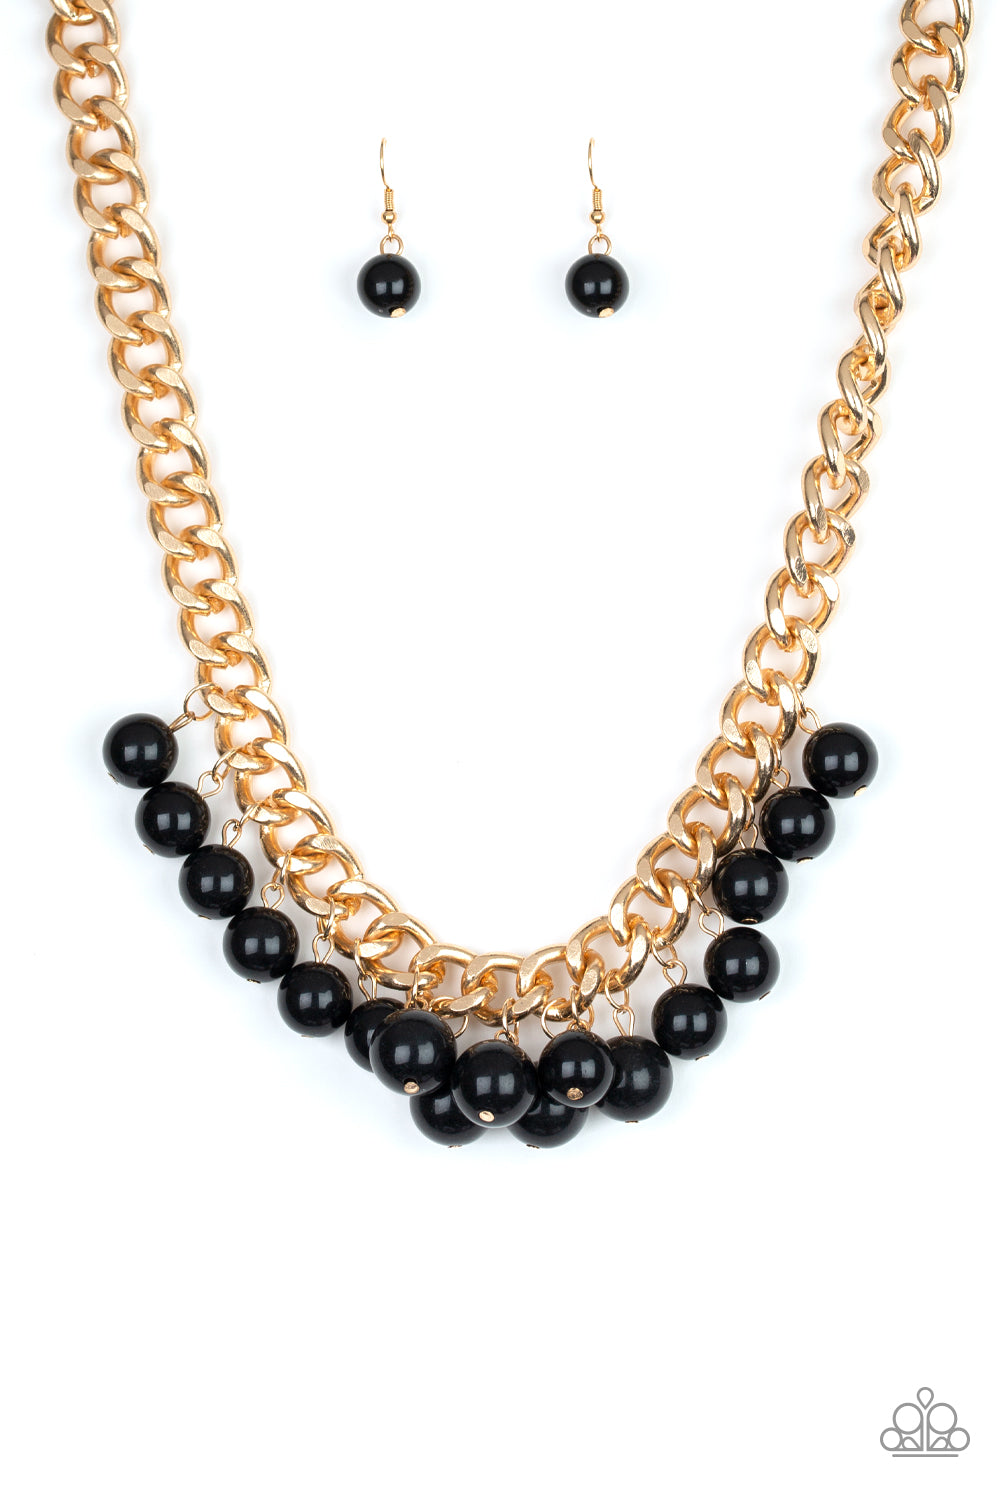 Paparazzi Accessories Get Off My Runway - Gold Necklaces - Lady T Accessories